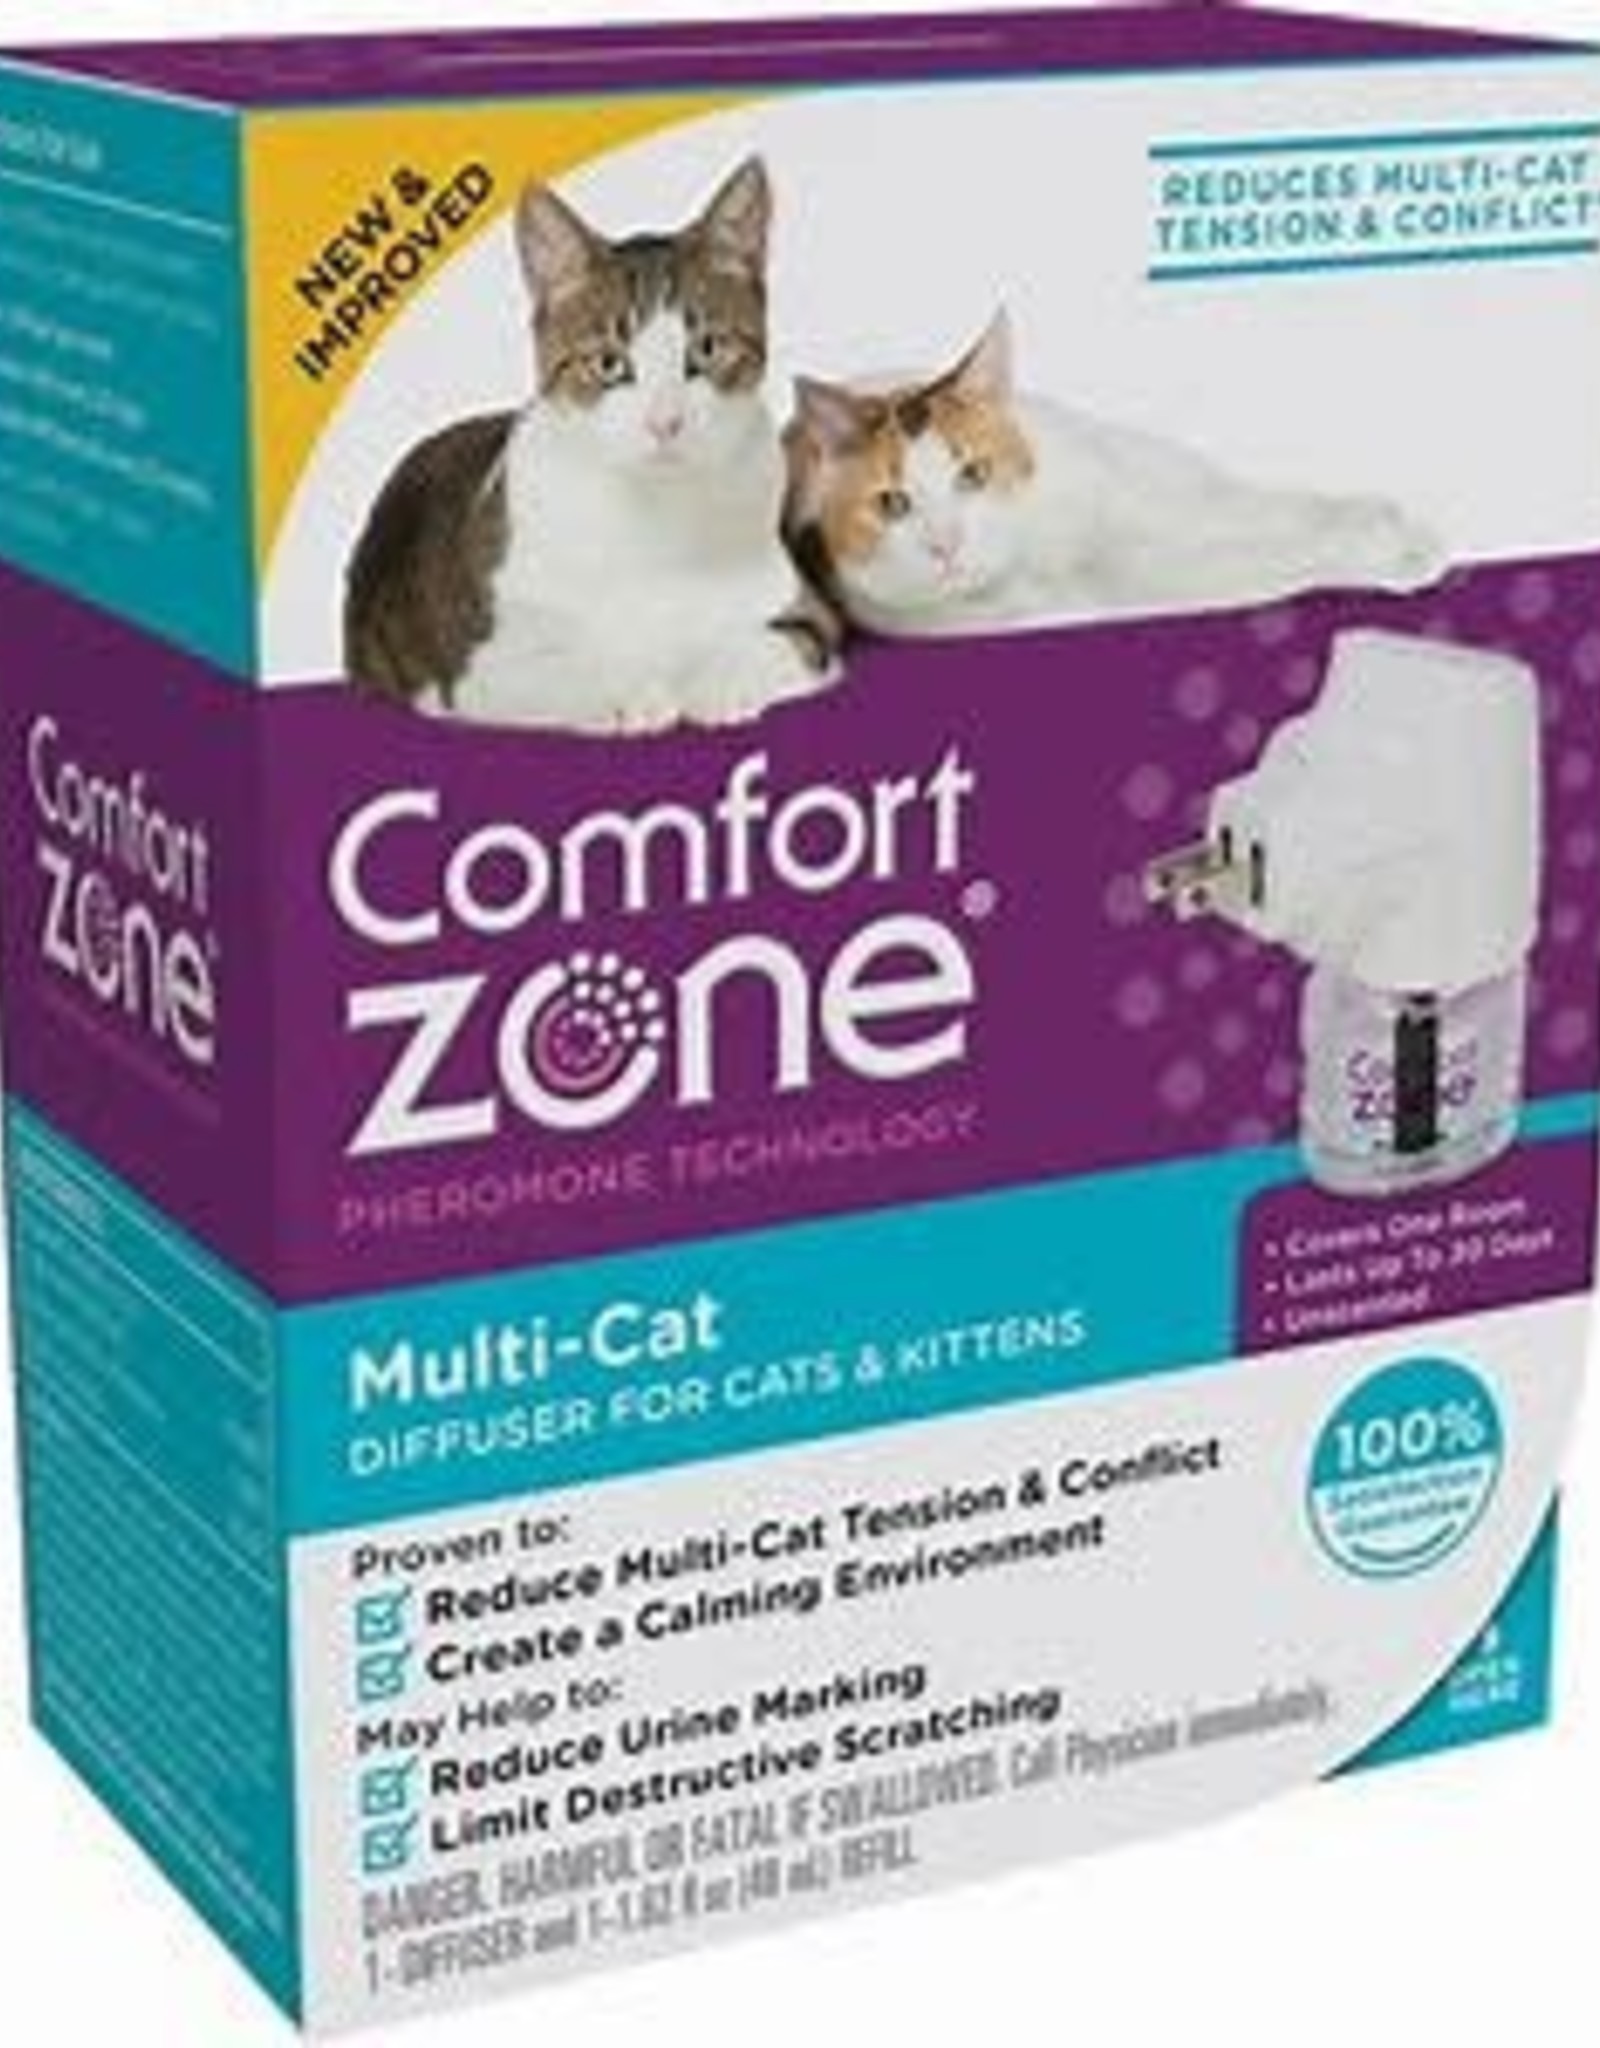 Comfort Zone Multi-Cat Diffuser for Cats & Kittens (1-Pack)